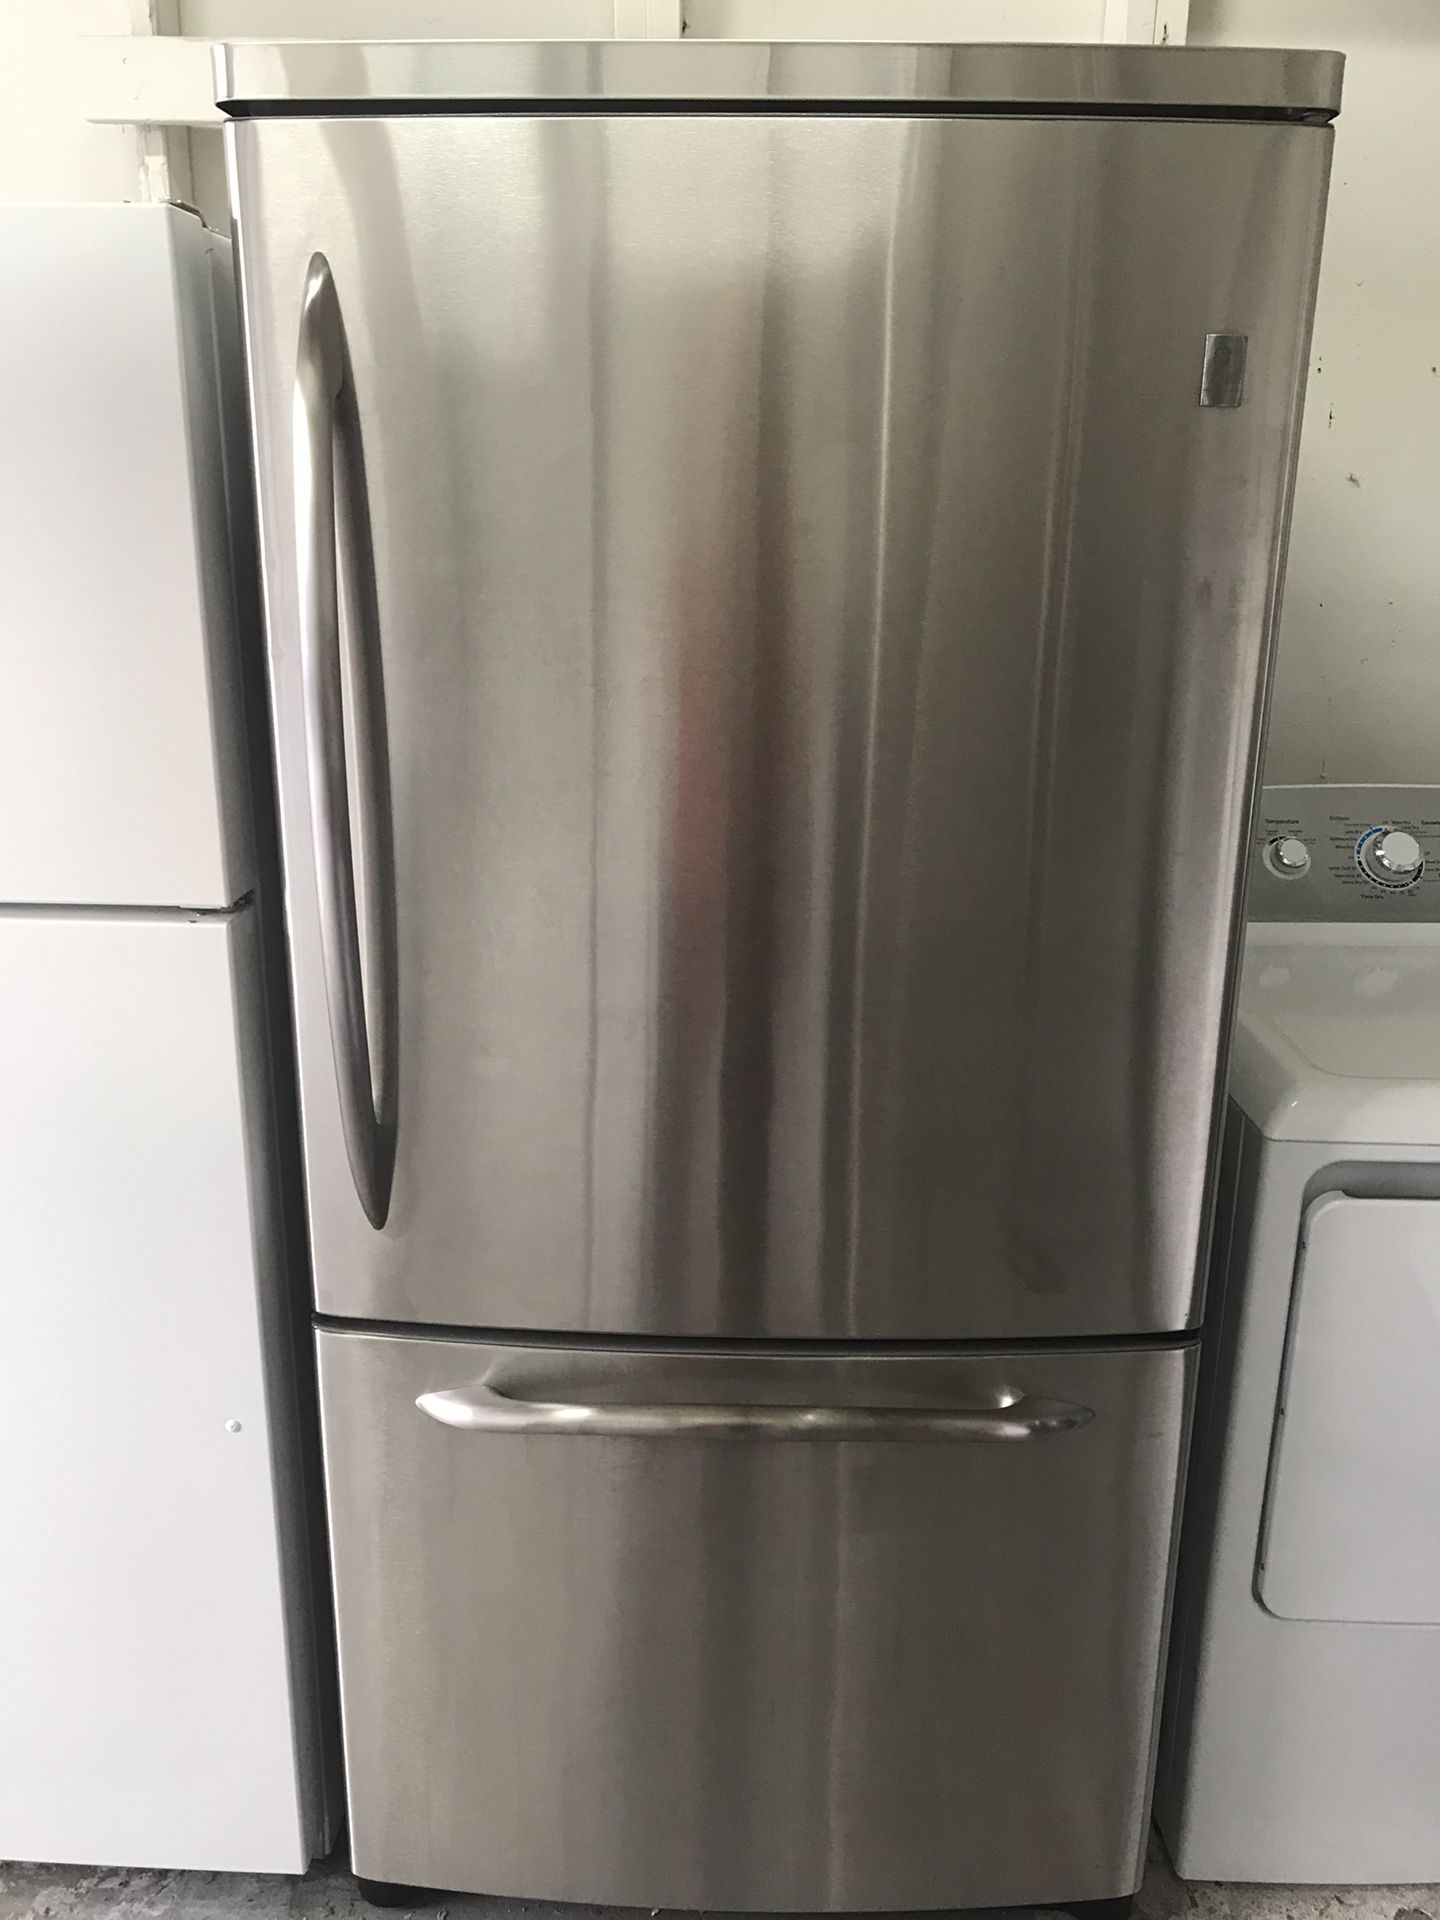 GE stainless French doors refrigerator 33” Wide 70” Tall in excellent condition plus 6 months warranty. Delivery service available . Hablamos español